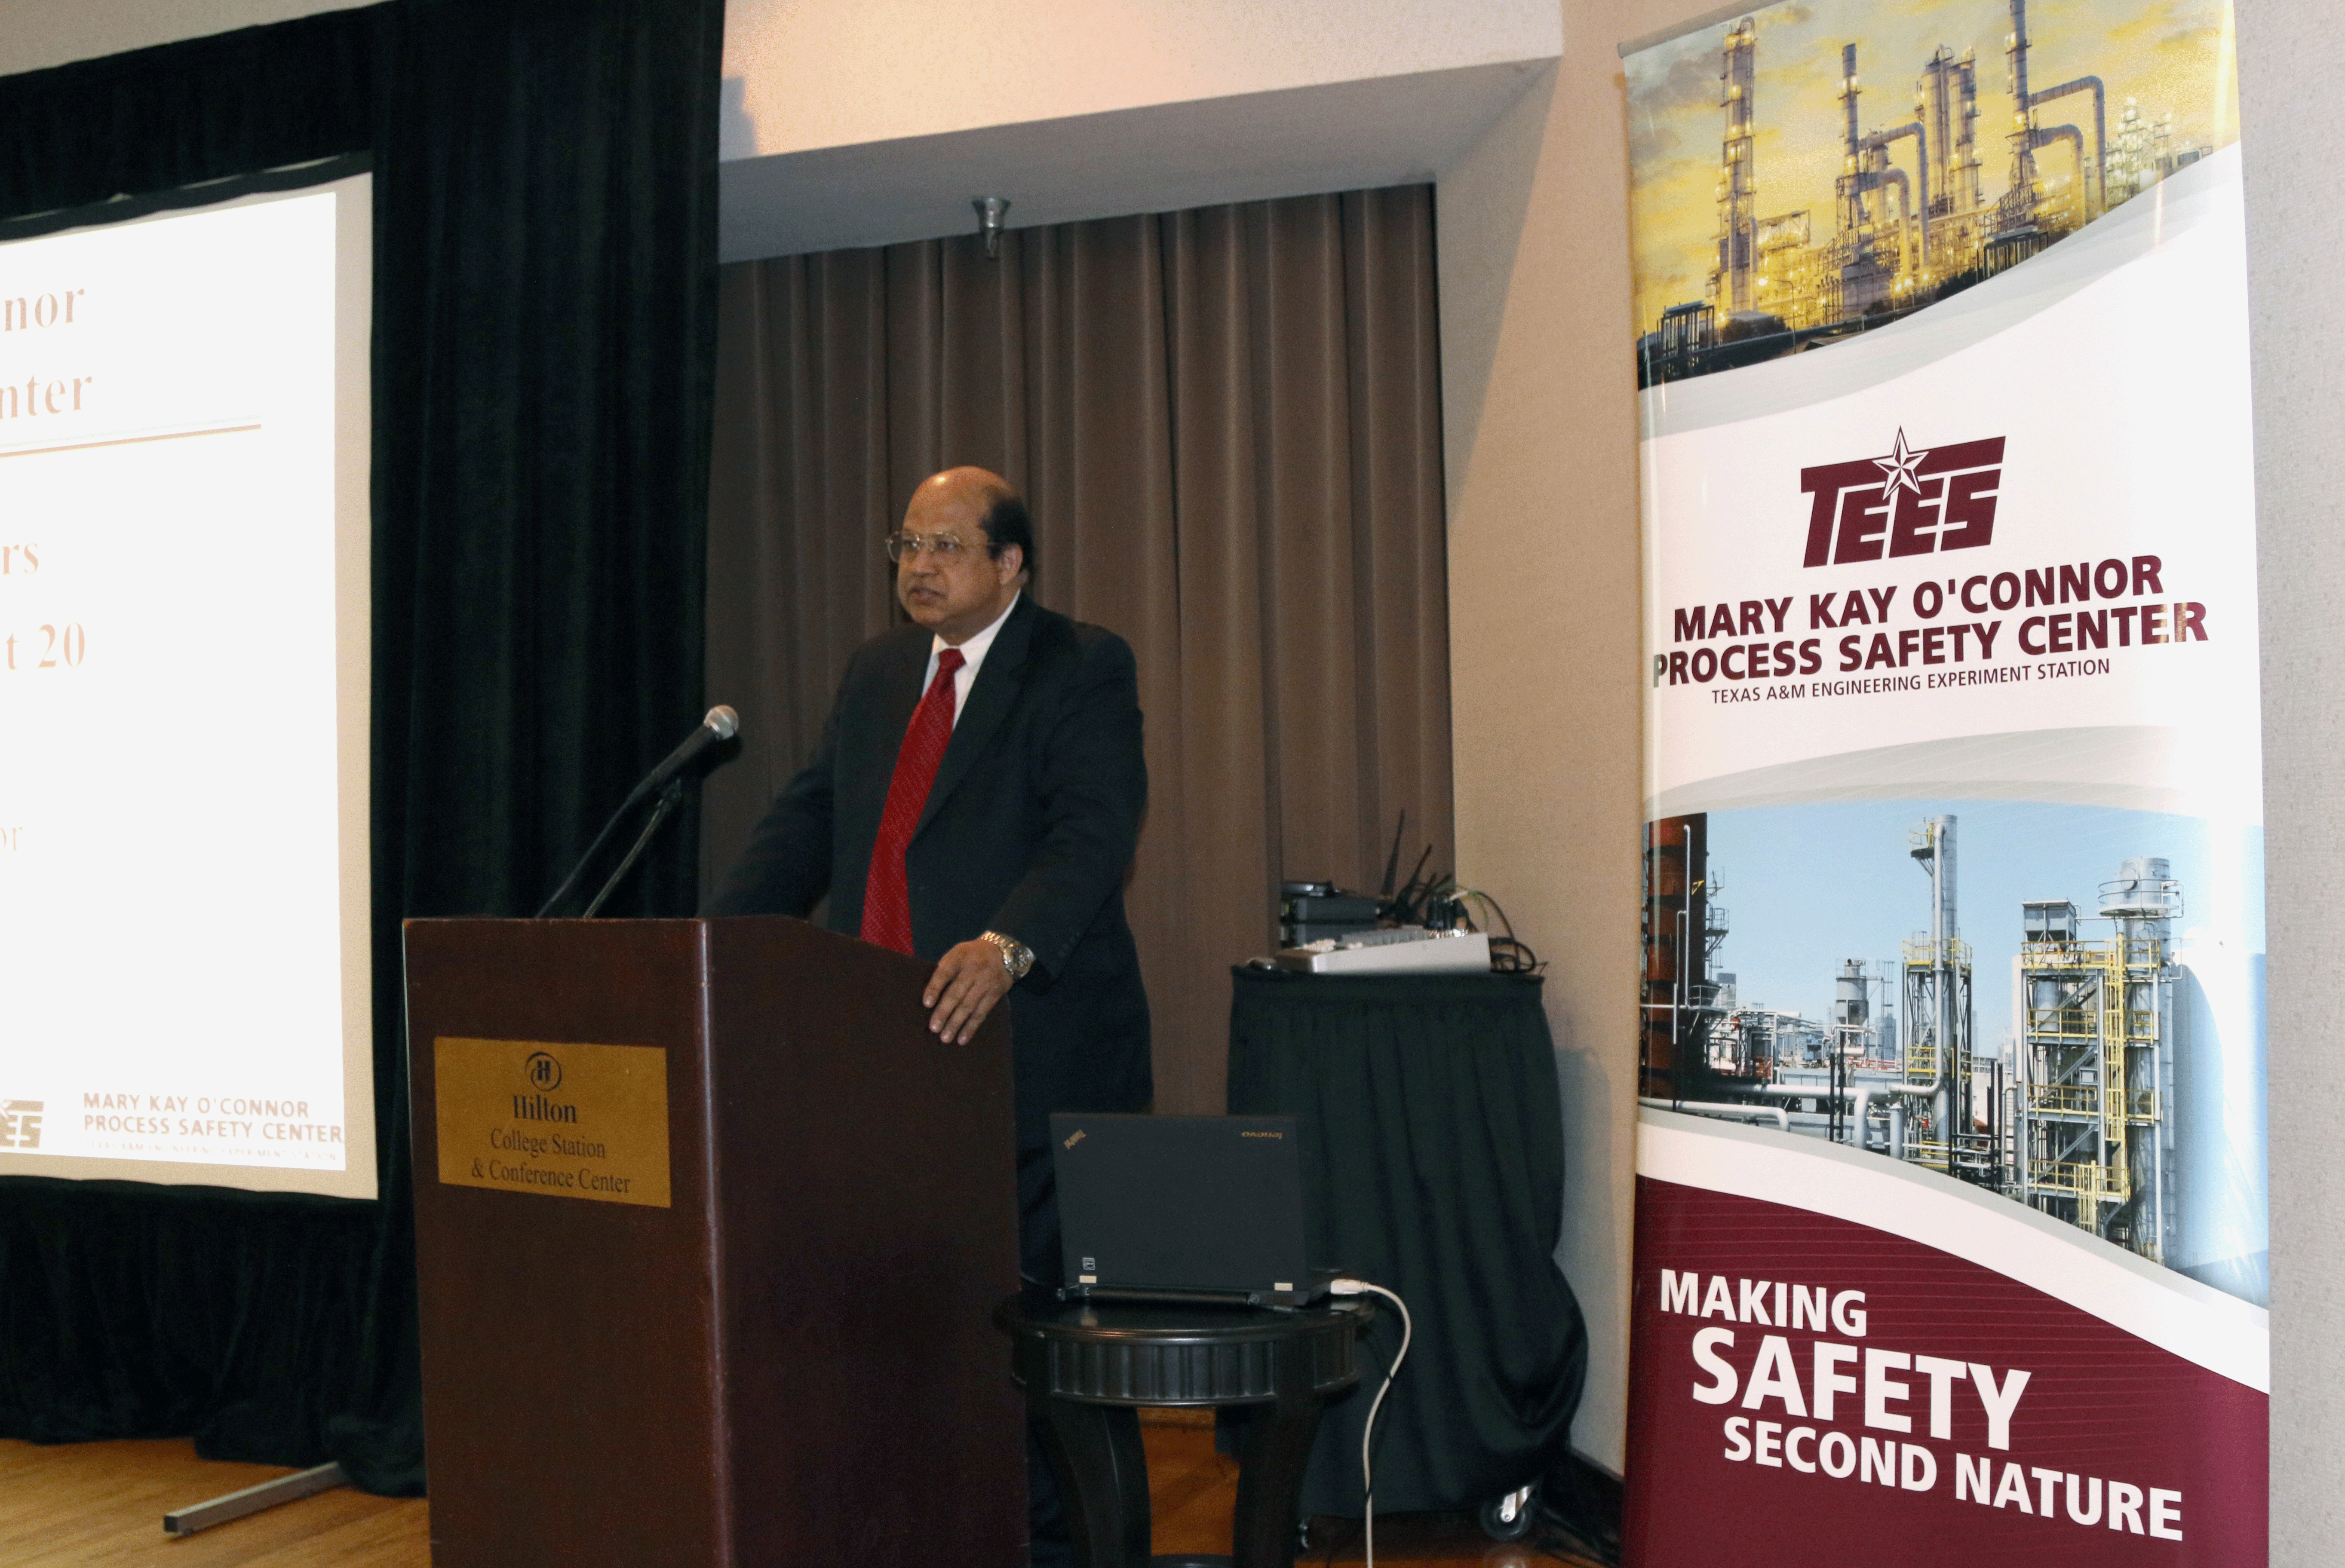 Dr. Sam Mannan speaking on the podium with TEES Mary Kay O'Conner Process Safety Center banner displayed on the side.